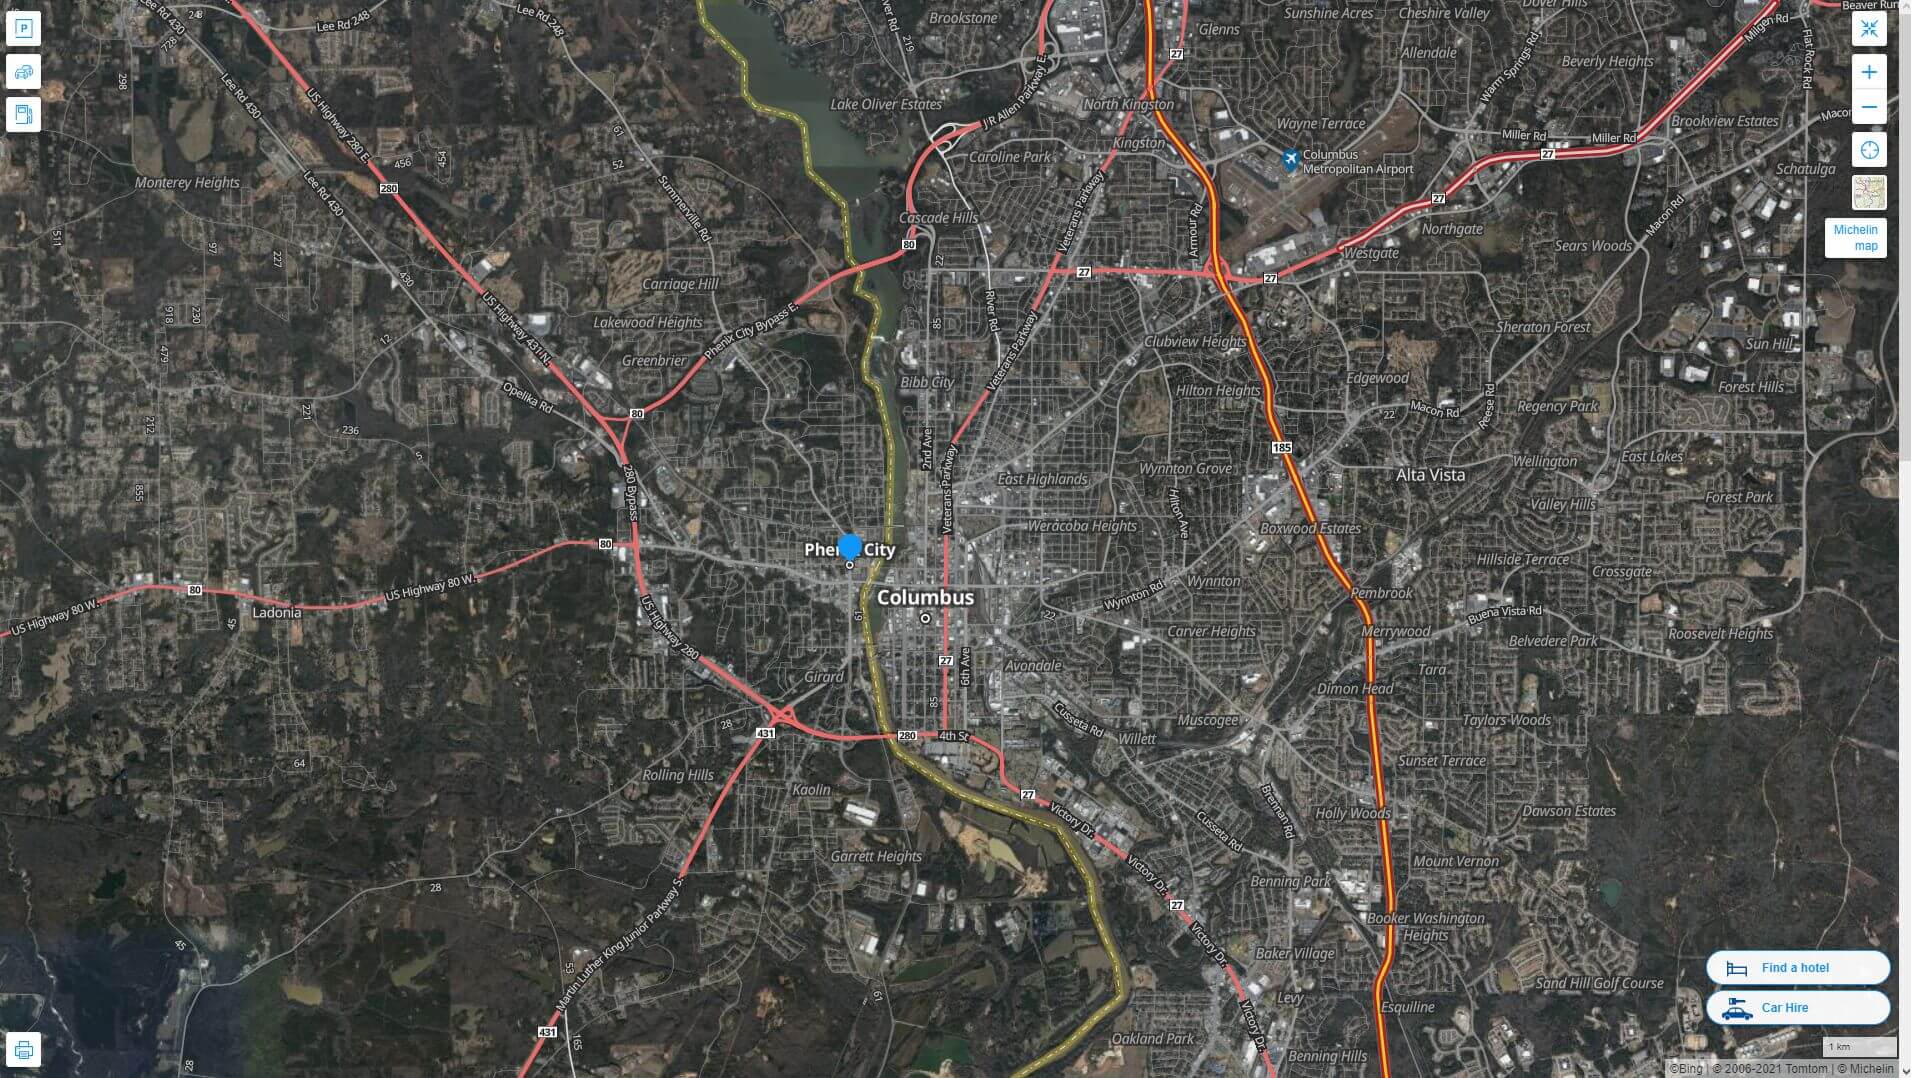 Phenix City Alabama Highway and Road Map with Satellite View